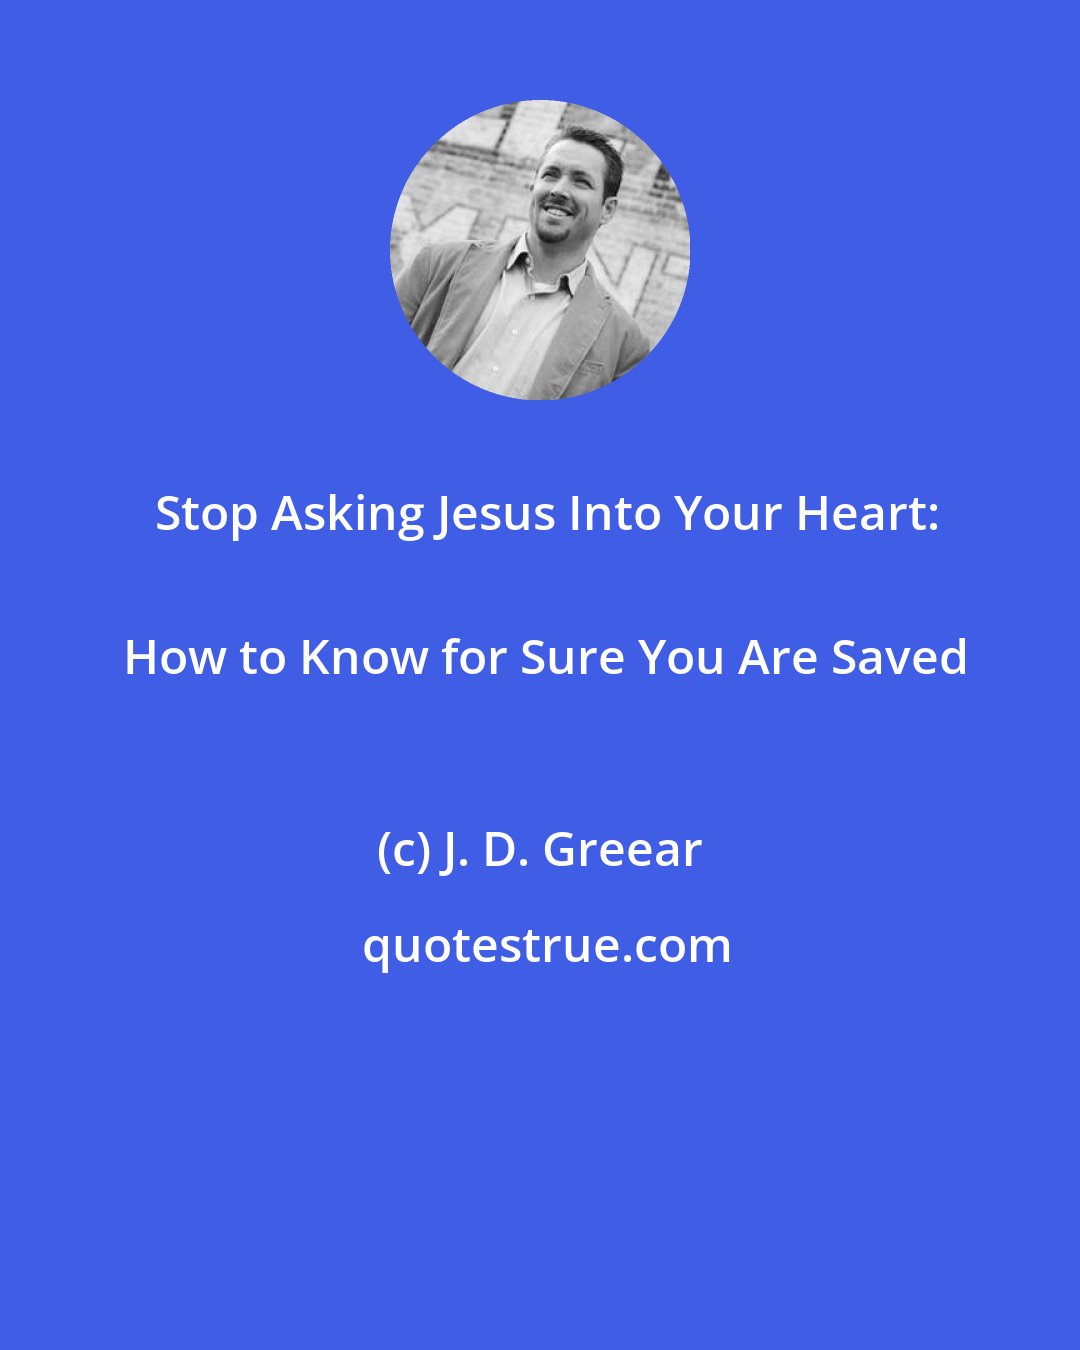 J. D. Greear: Stop Asking Jesus Into Your Heart:
  How to Know for Sure You Are Saved